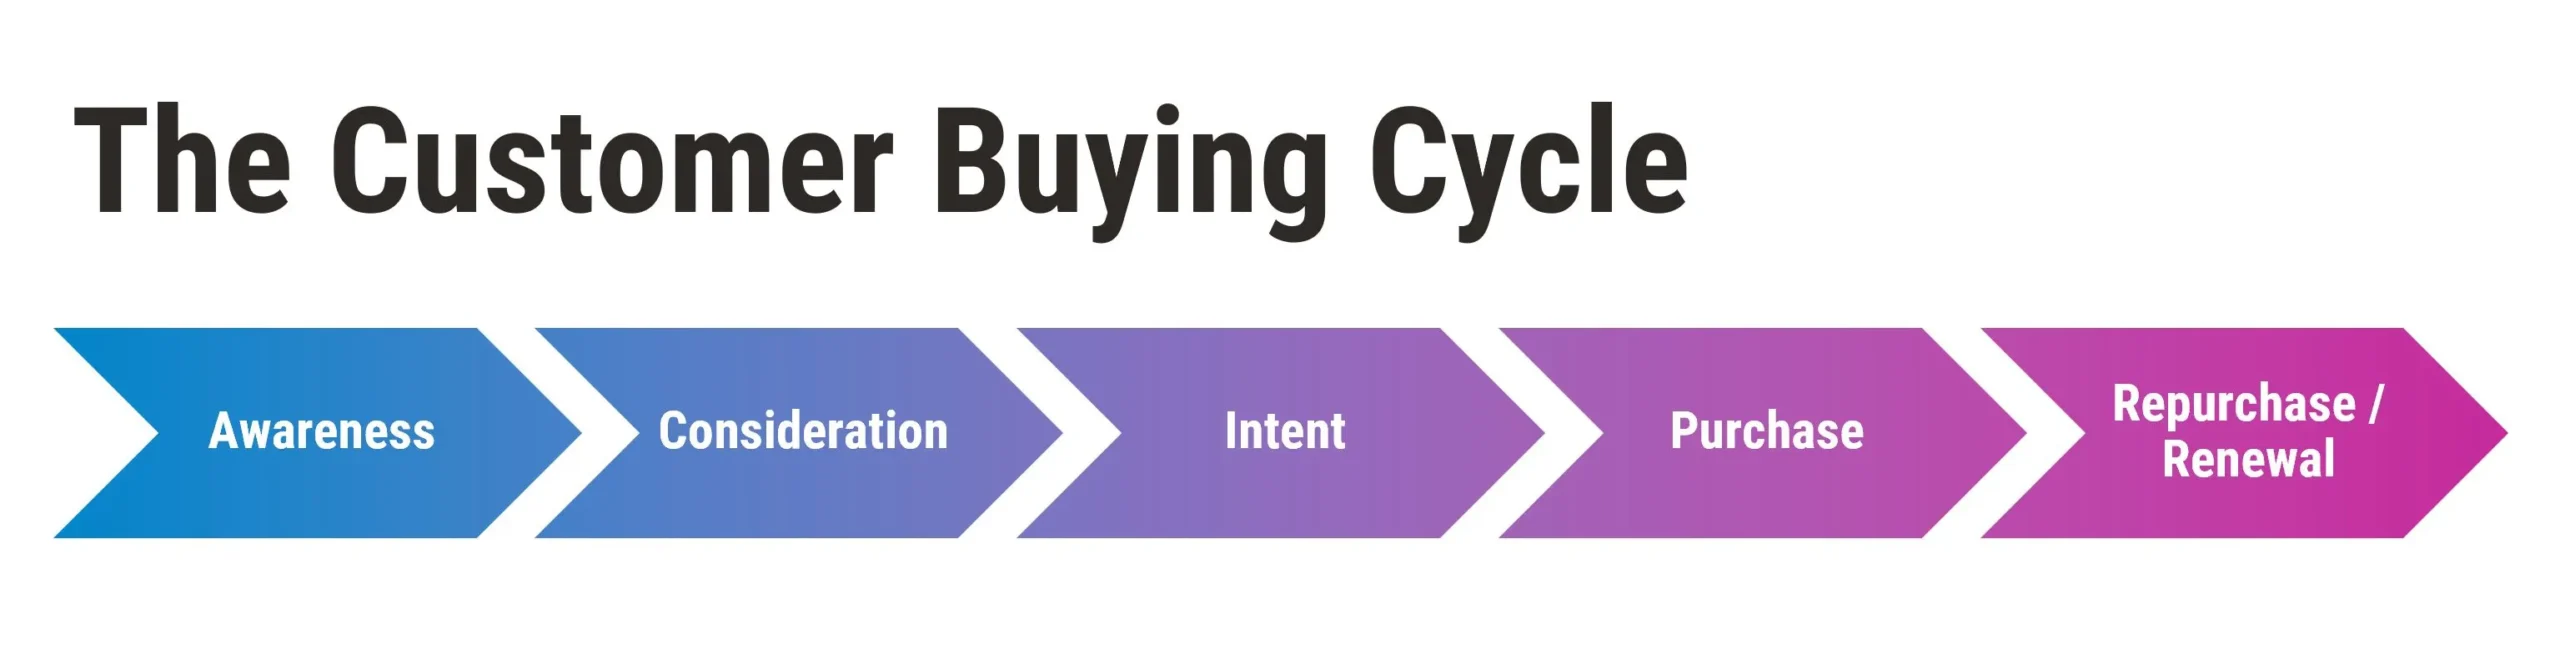 An infographic explaining the customer buying cycle: awareness, consideration, intent, purchase, repurchase/renewal.